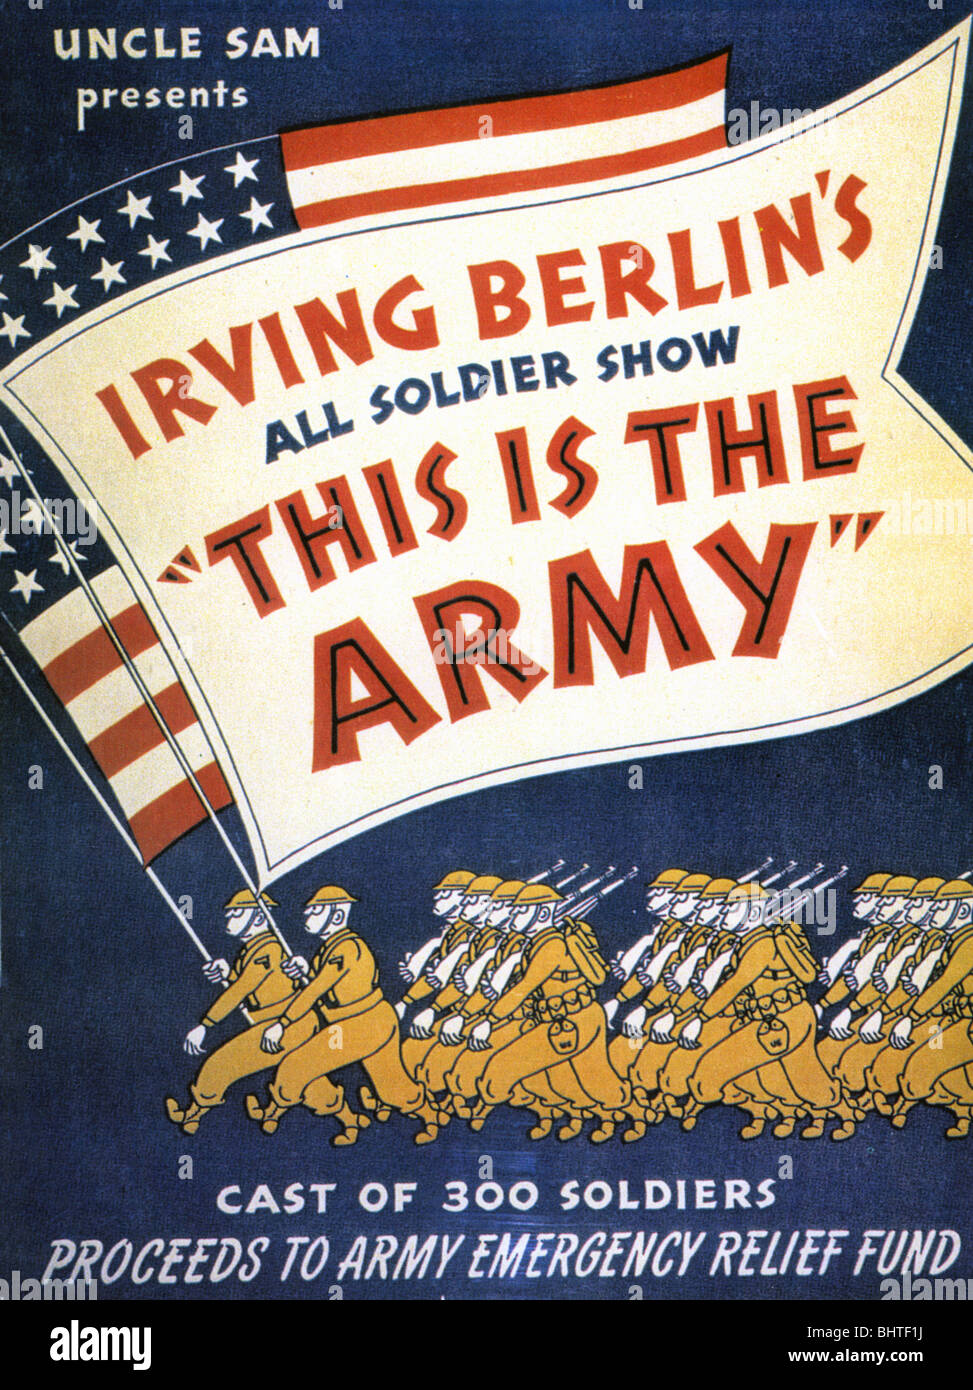 THIS IS THE ARMY - Poster for 1942 Broadway show by Irving Berlin subsequently made into a film Stock Photo